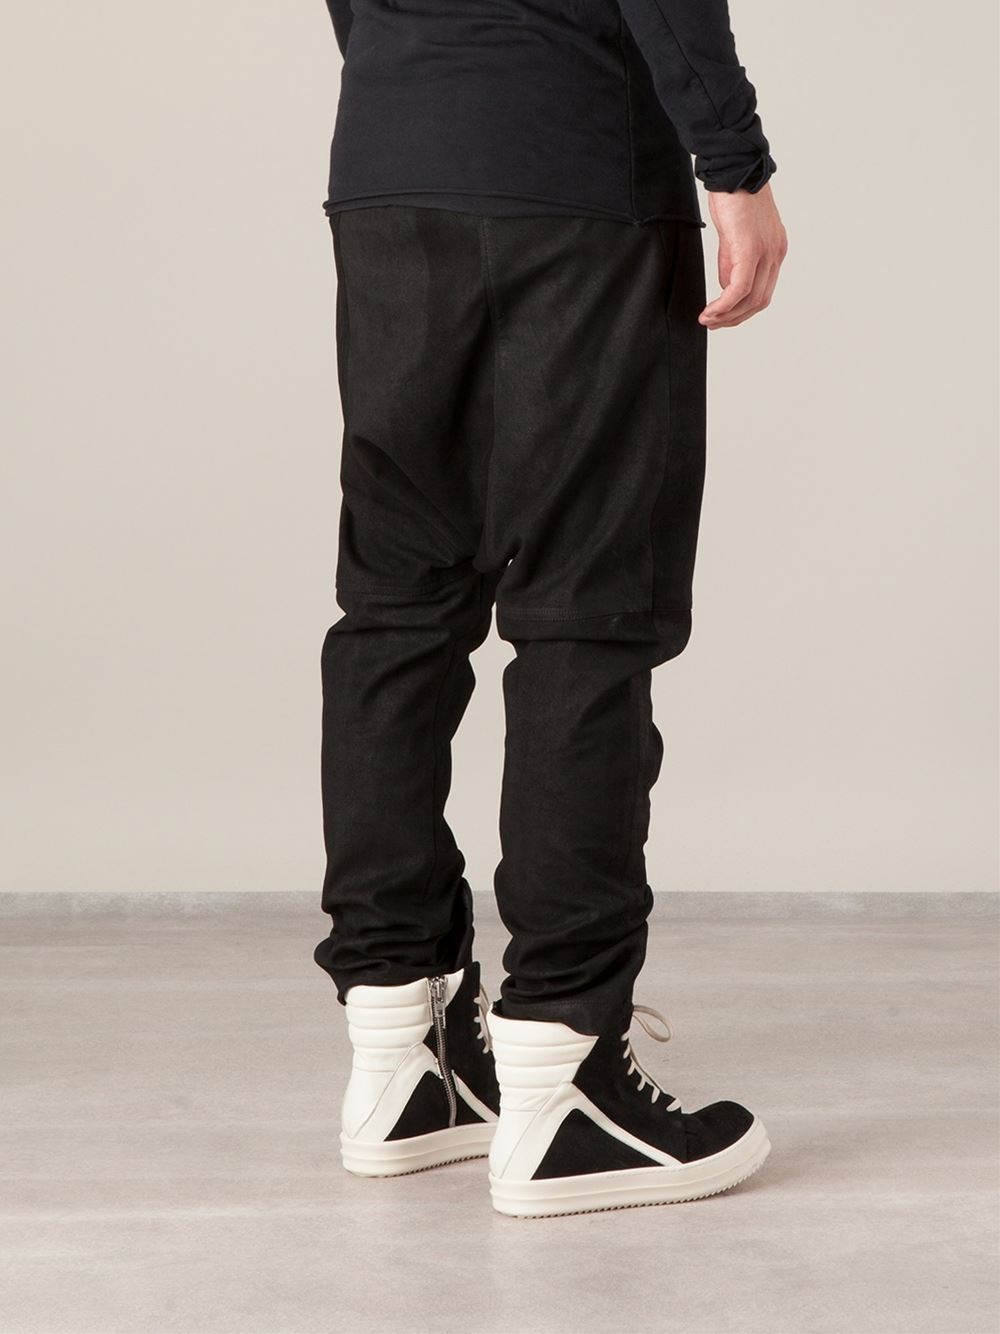 Lyst - Rick Owens Drop Crotch Track Pants in Black for Men